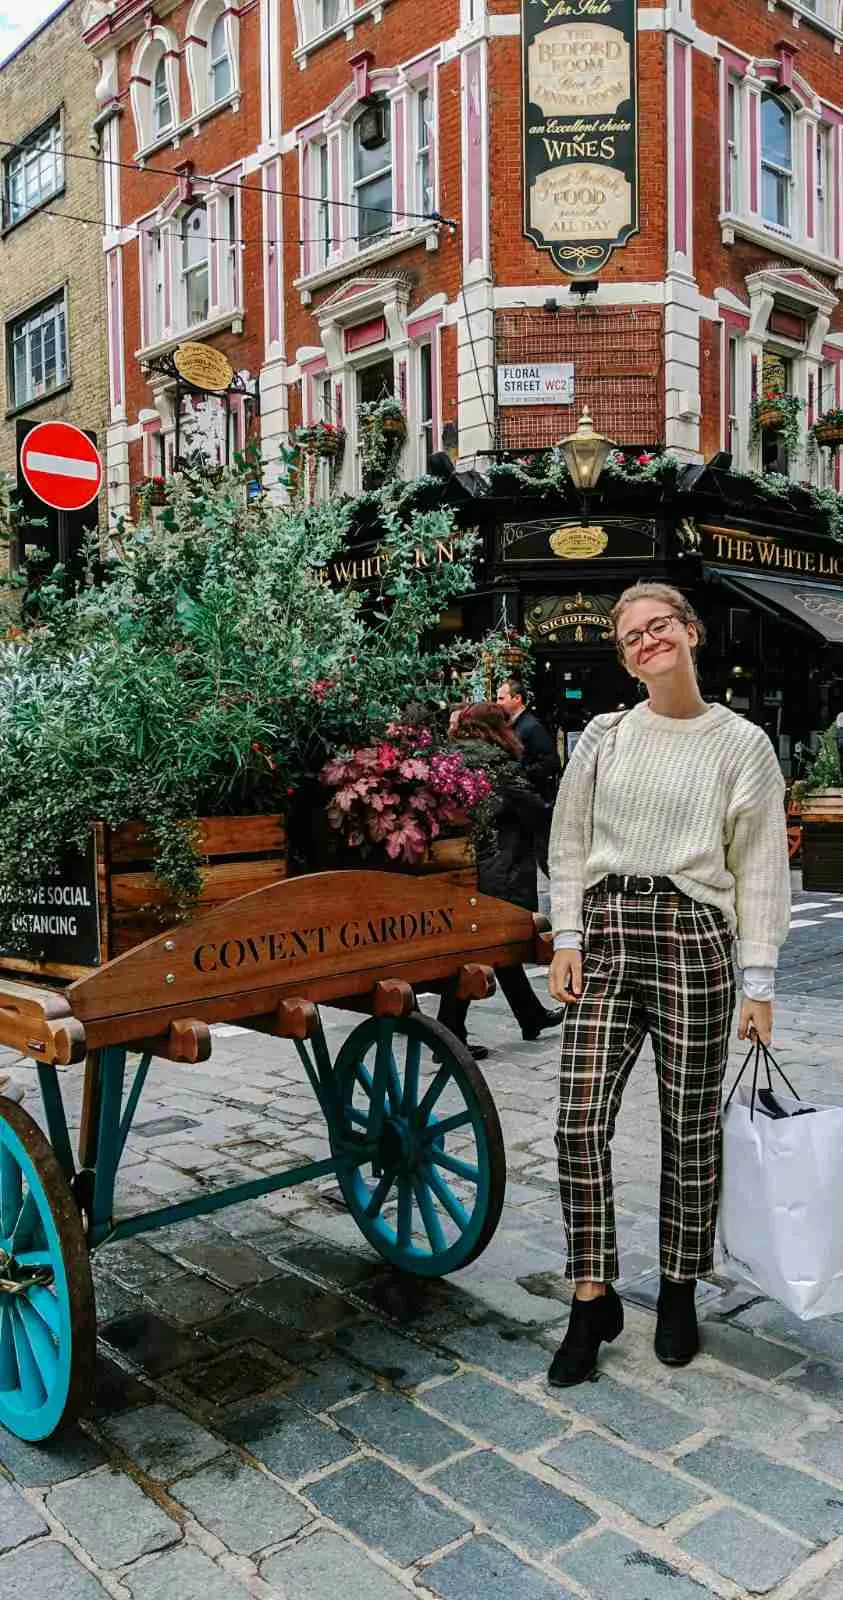 A girl standing in front of a Covent Garden carriage 